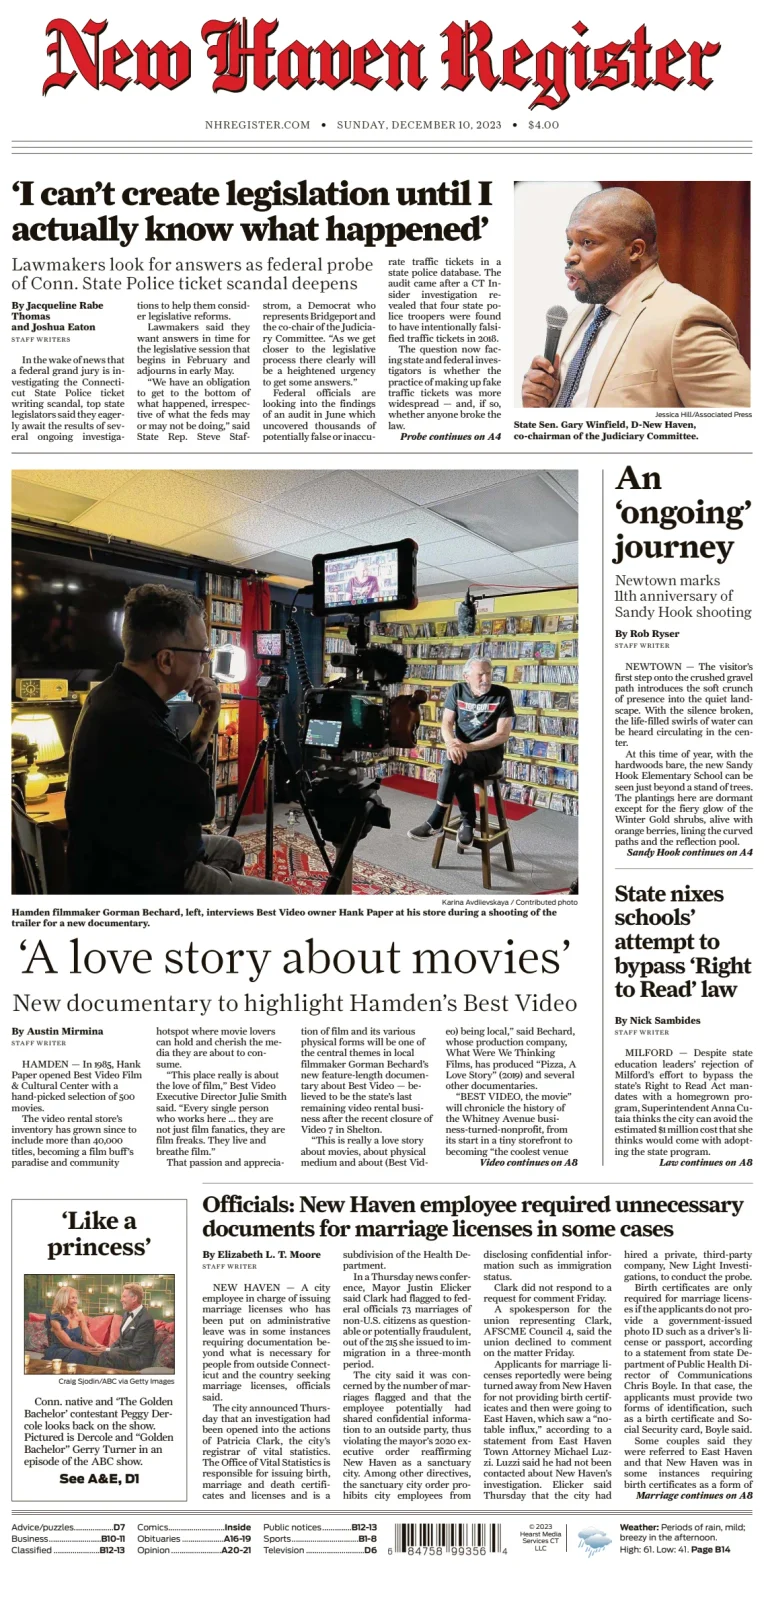 New Haven Register (Sunday) (New Haven, CT)